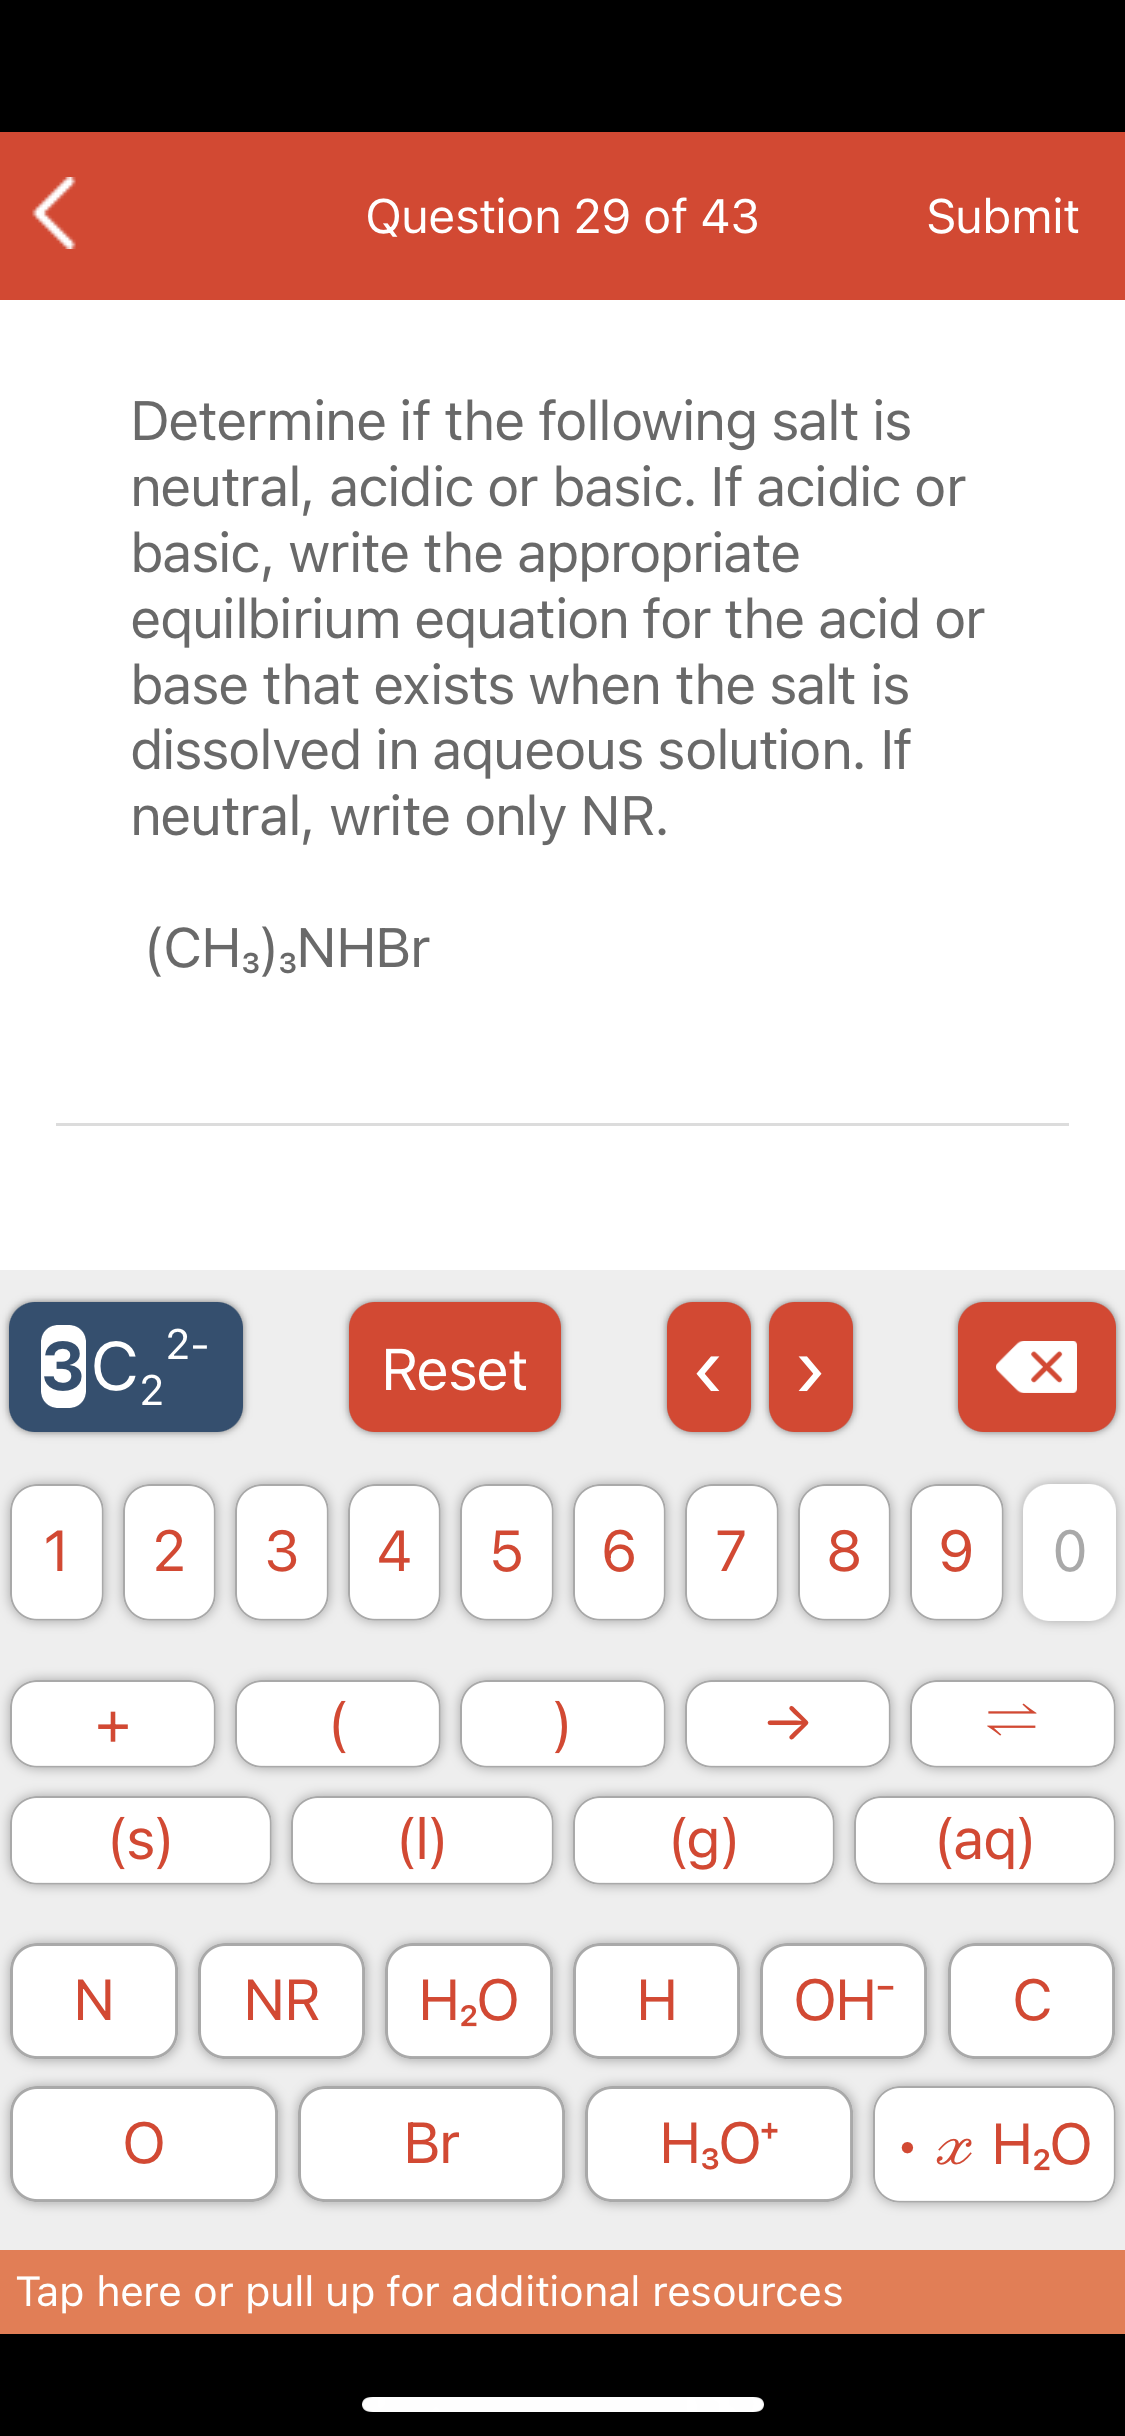 Question 29 of 43
Submit
Determine if the following salt is
neutral, acidic or basic. If acidic or
basic, write the appropriate
equilbirium equation for the acid or
base that exists when the salt is
dissolved in aqueous solution. If
neutral, write only NR.
(CH3);NHB.
3c,2-
3C2
Reset
>
1
4
6.
7
8 9
+
)
(s)
(1)
(g)
(aq)
NR
H2O
H.
OH-
C
Br
• x H2O
Tap here or pull up for additional resources
LO
